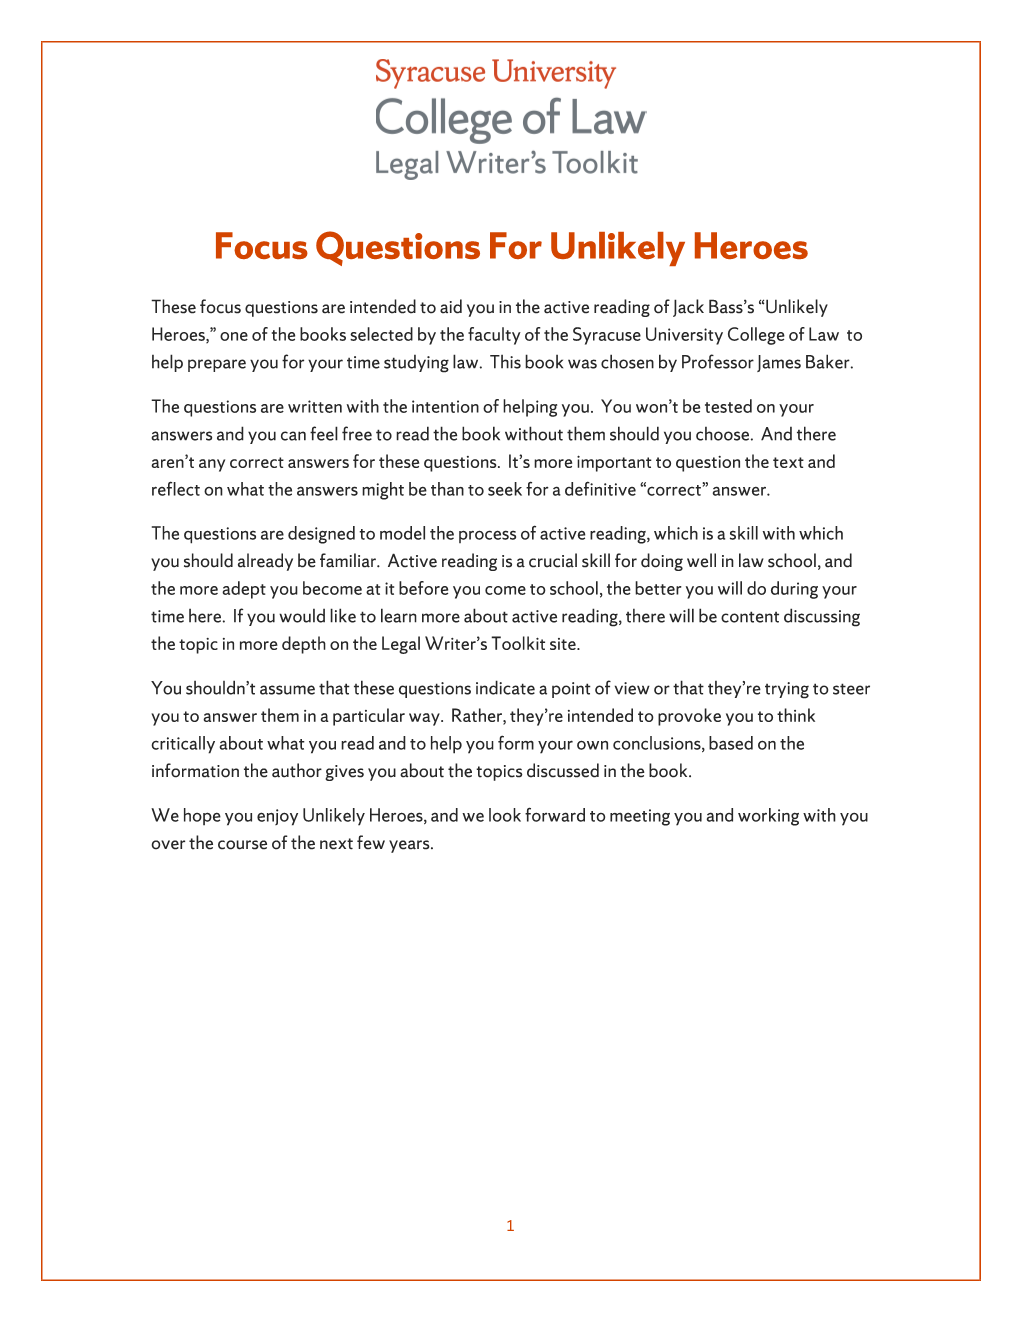 Focus Questions for Unlikely Heroes